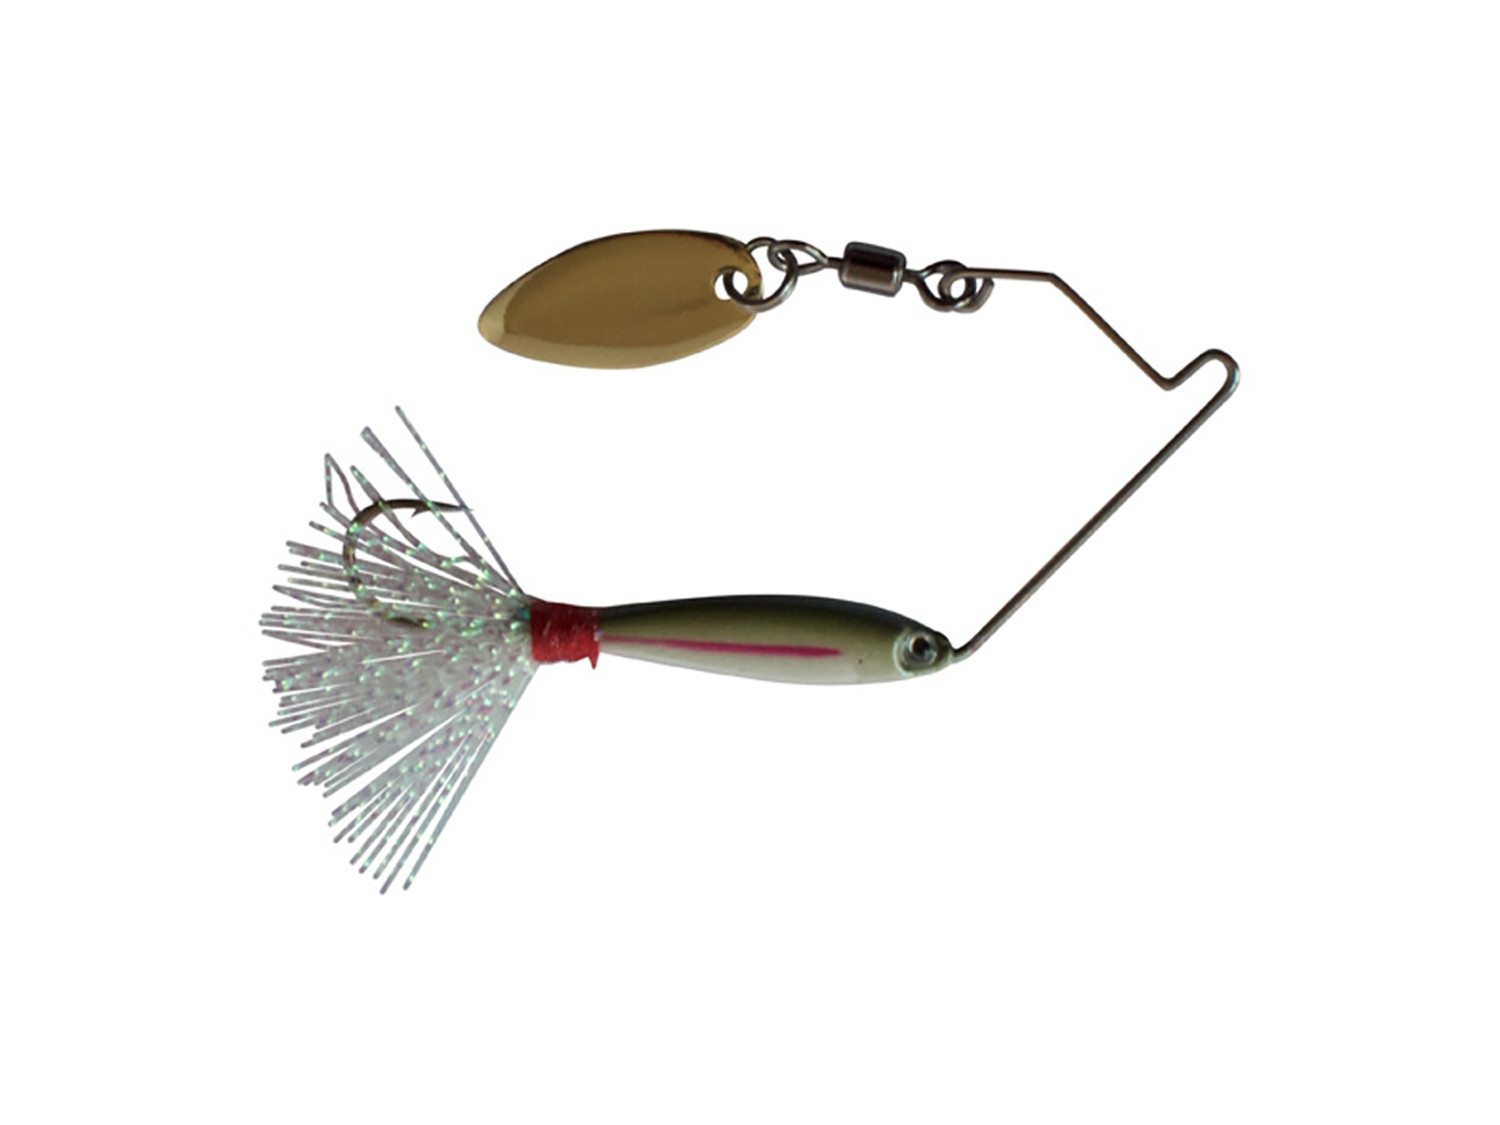 Chatterbait Fishing Kit With Weedless Spinner Bait, Buzzbits